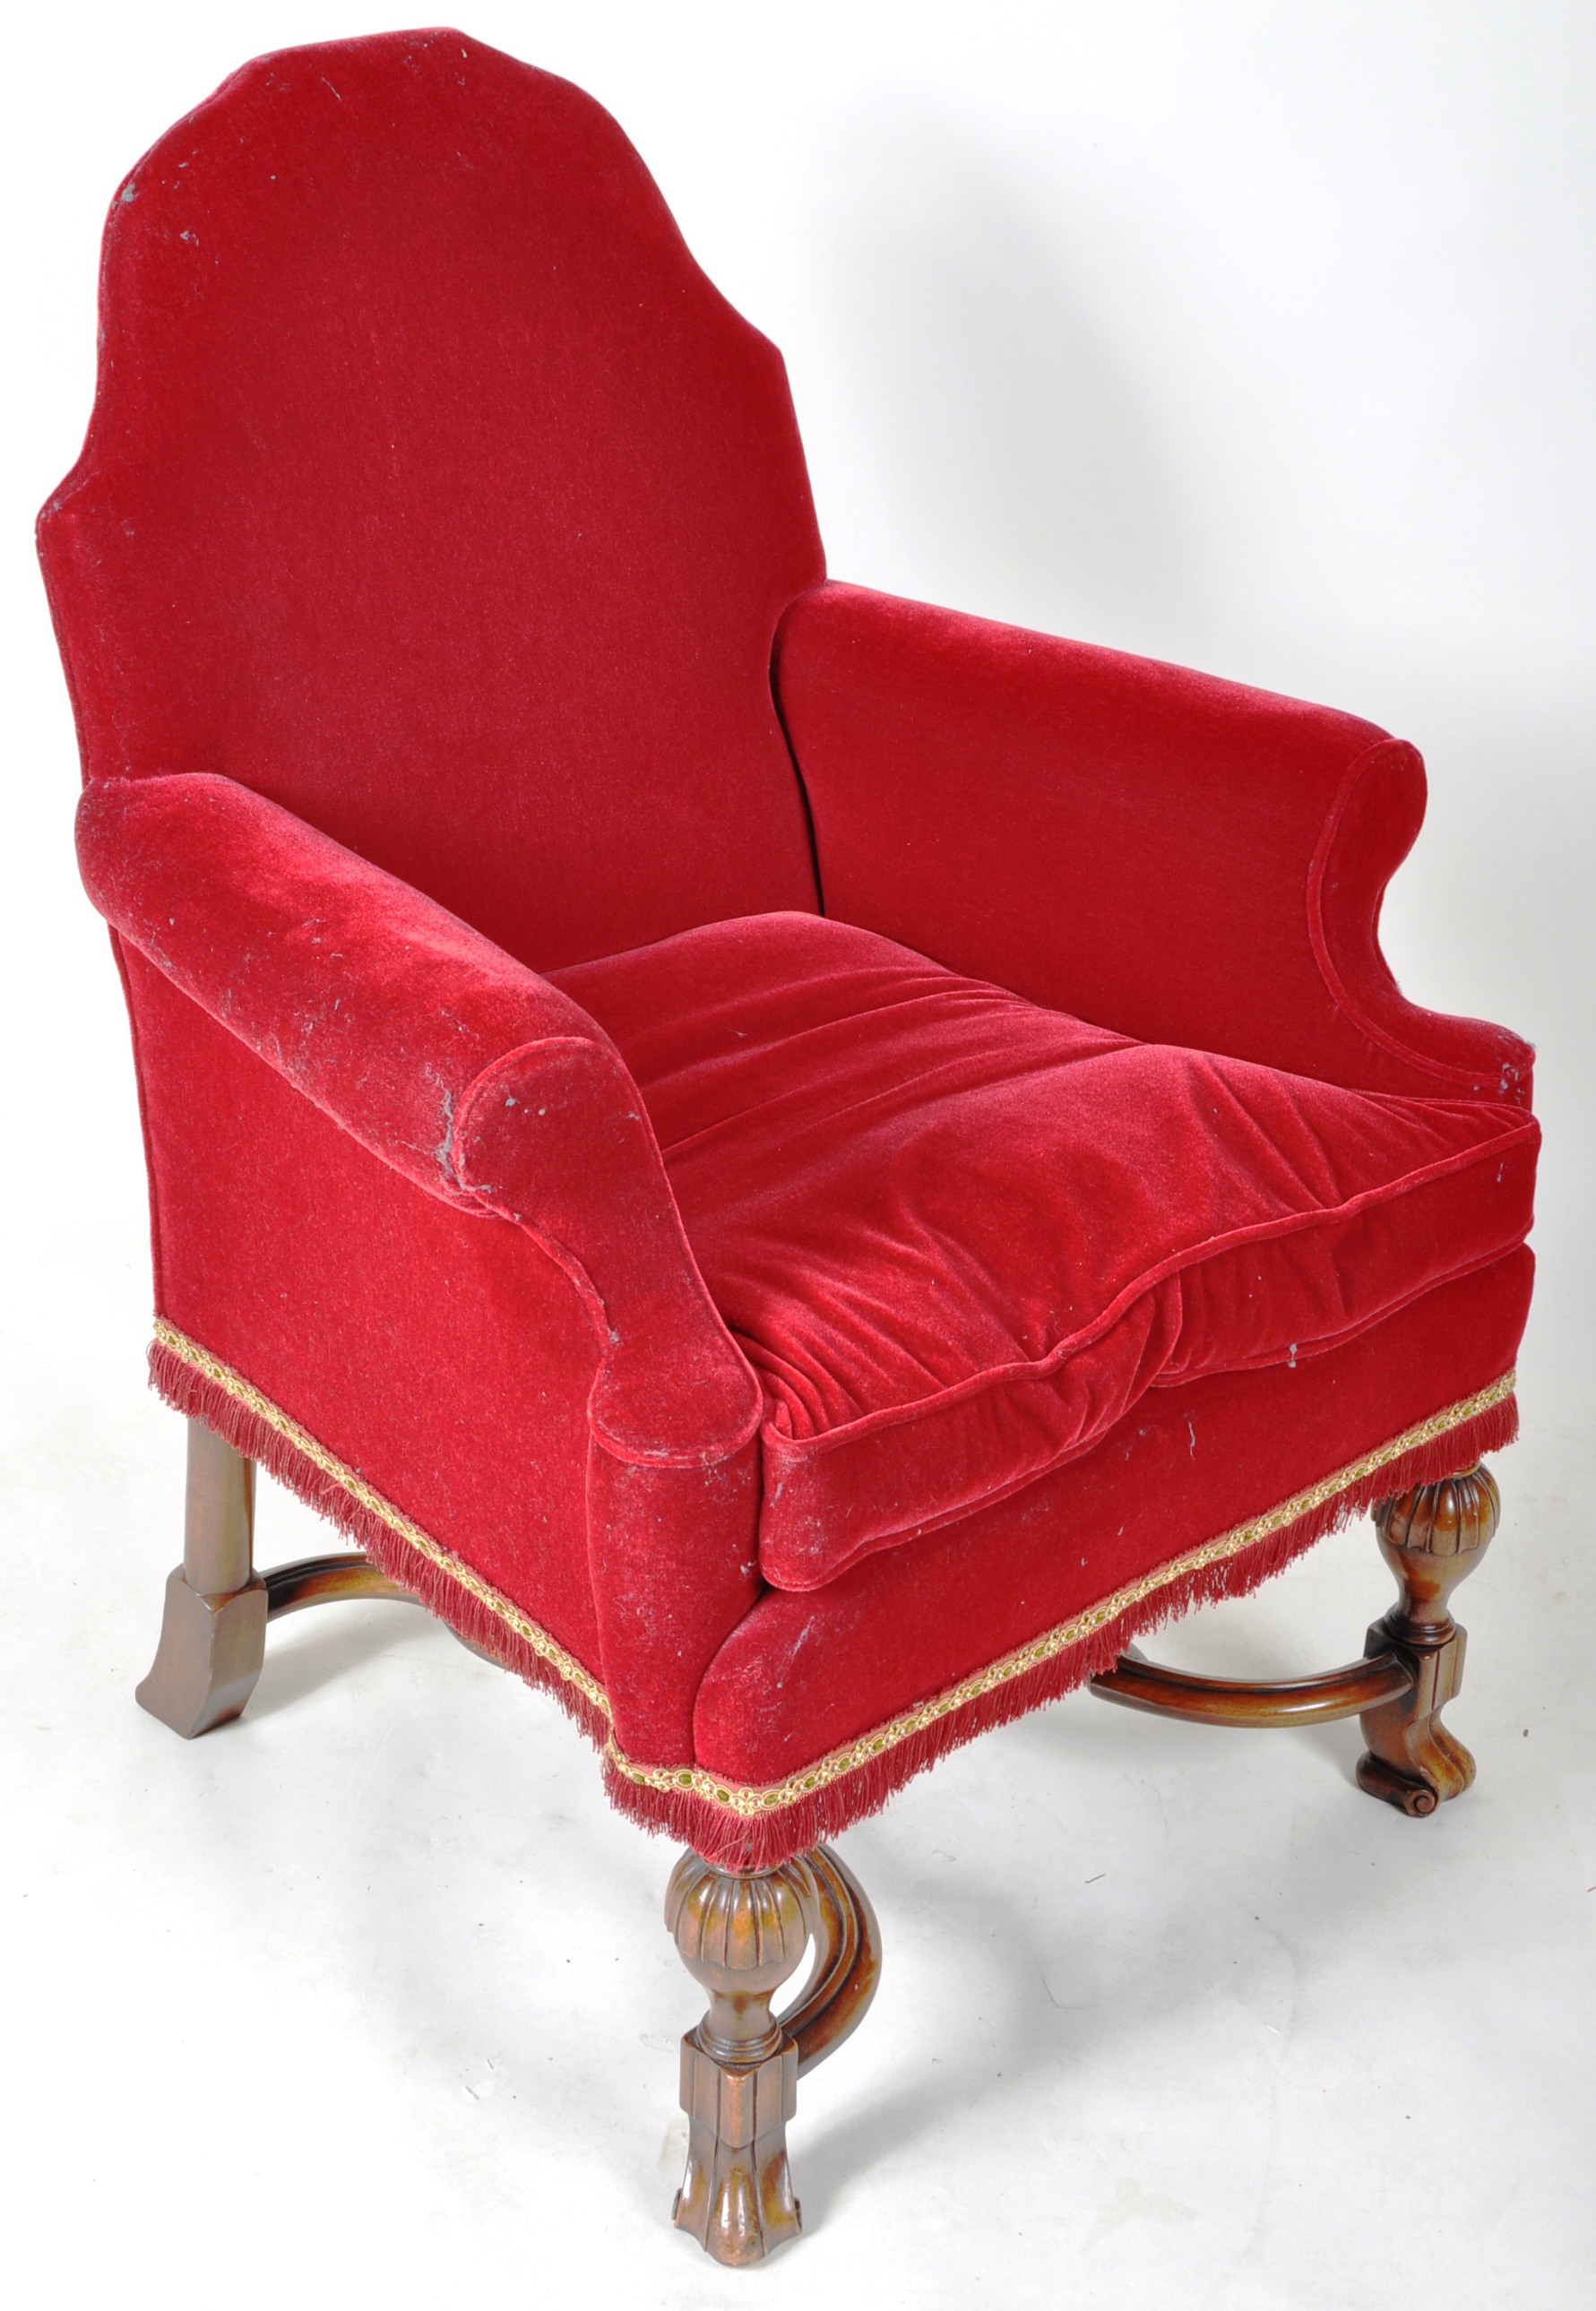 20TH CENTURY QUEEN ANNE REVIVAL FIRESIDE ARMCHAIR - Image 2 of 8